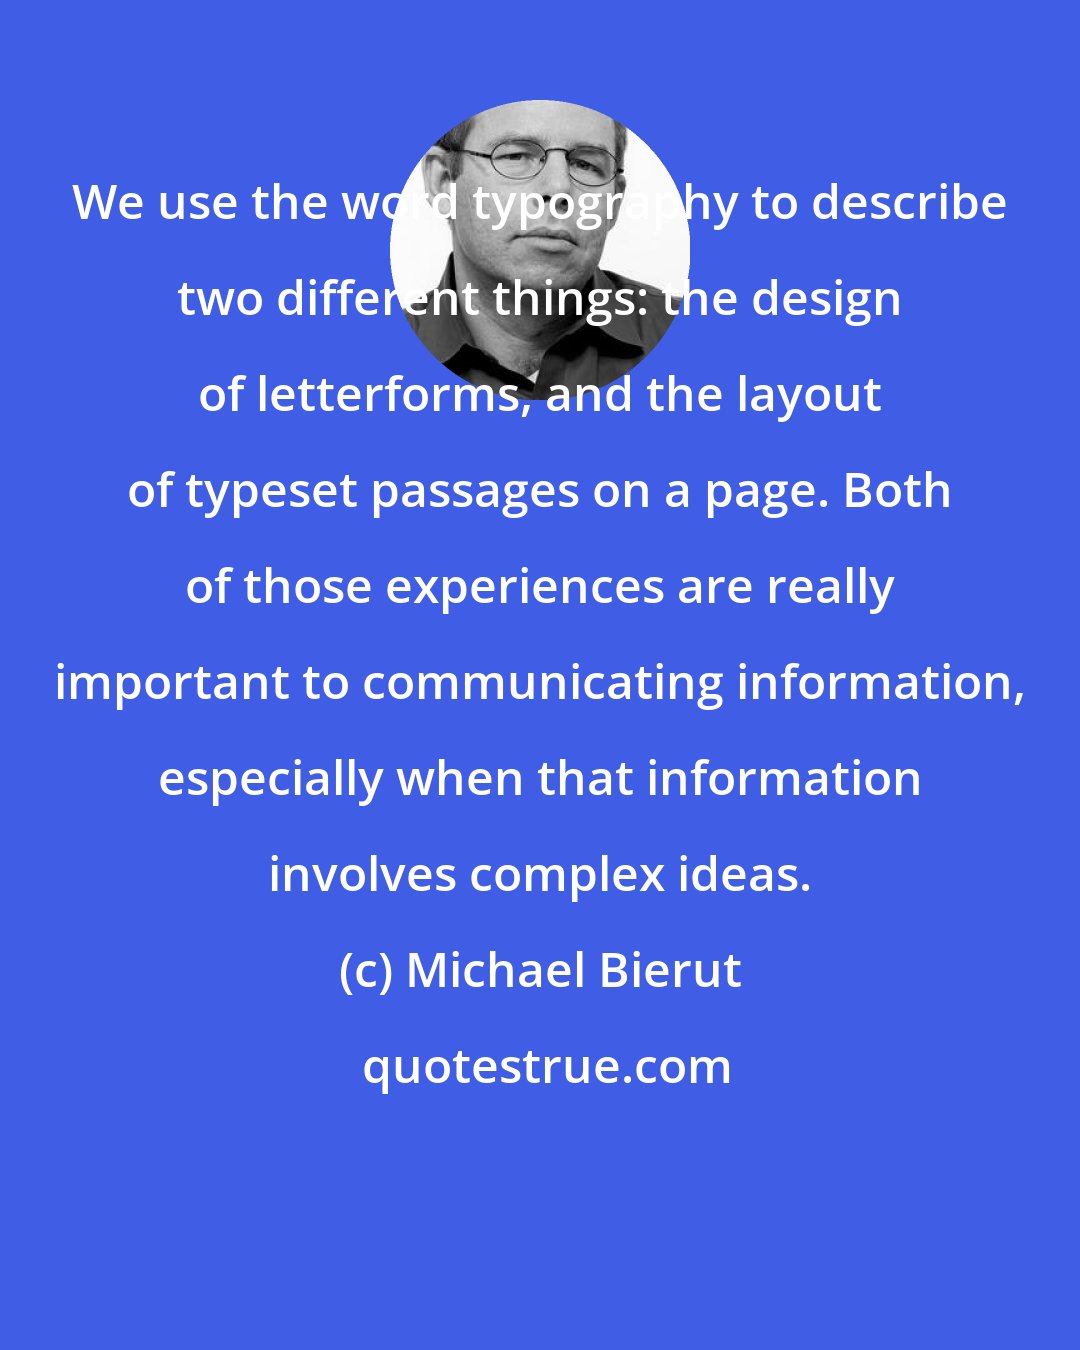 Michael Bierut: We use the word typography to describe two different things: the design of letterforms, and the layout of typeset passages on a page. Both of those experiences are really important to communicating information, especially when that information involves complex ideas.